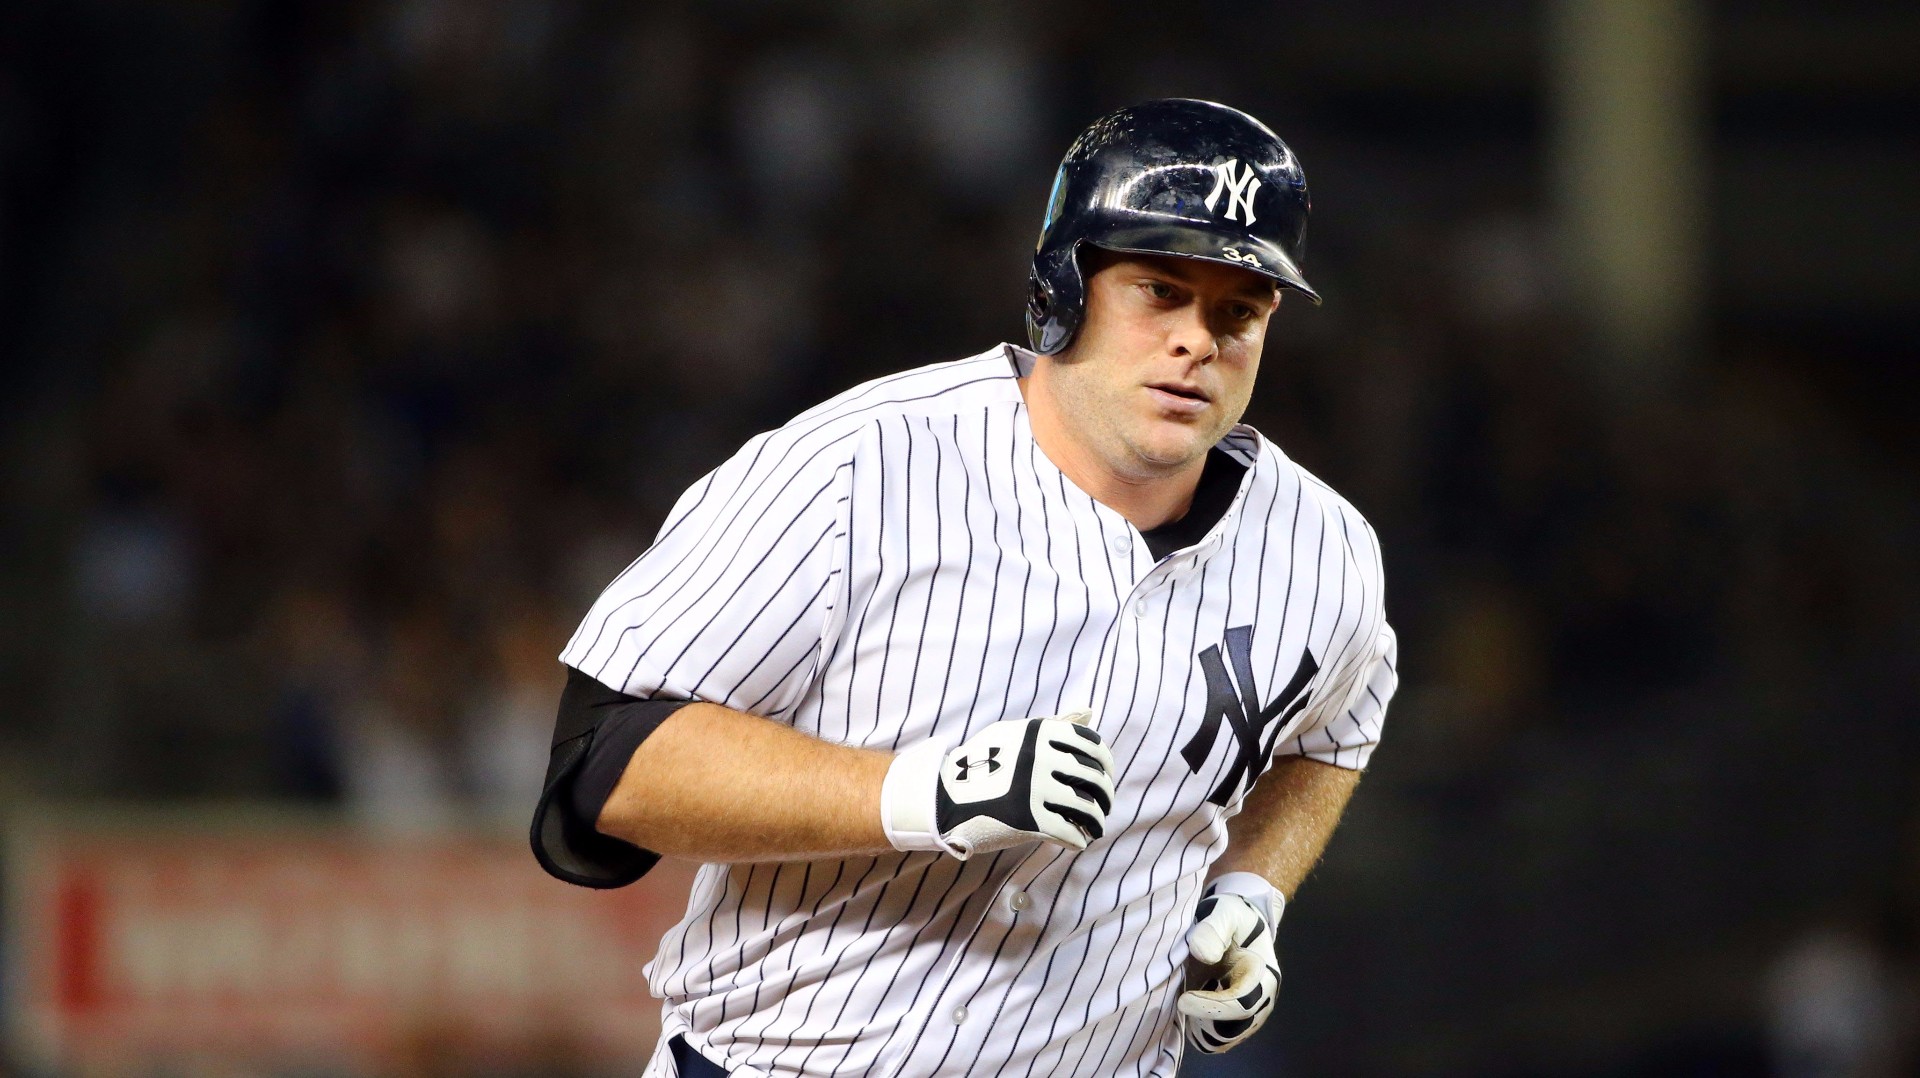 Brian McCann traded to Astros, ends hope of homecoming